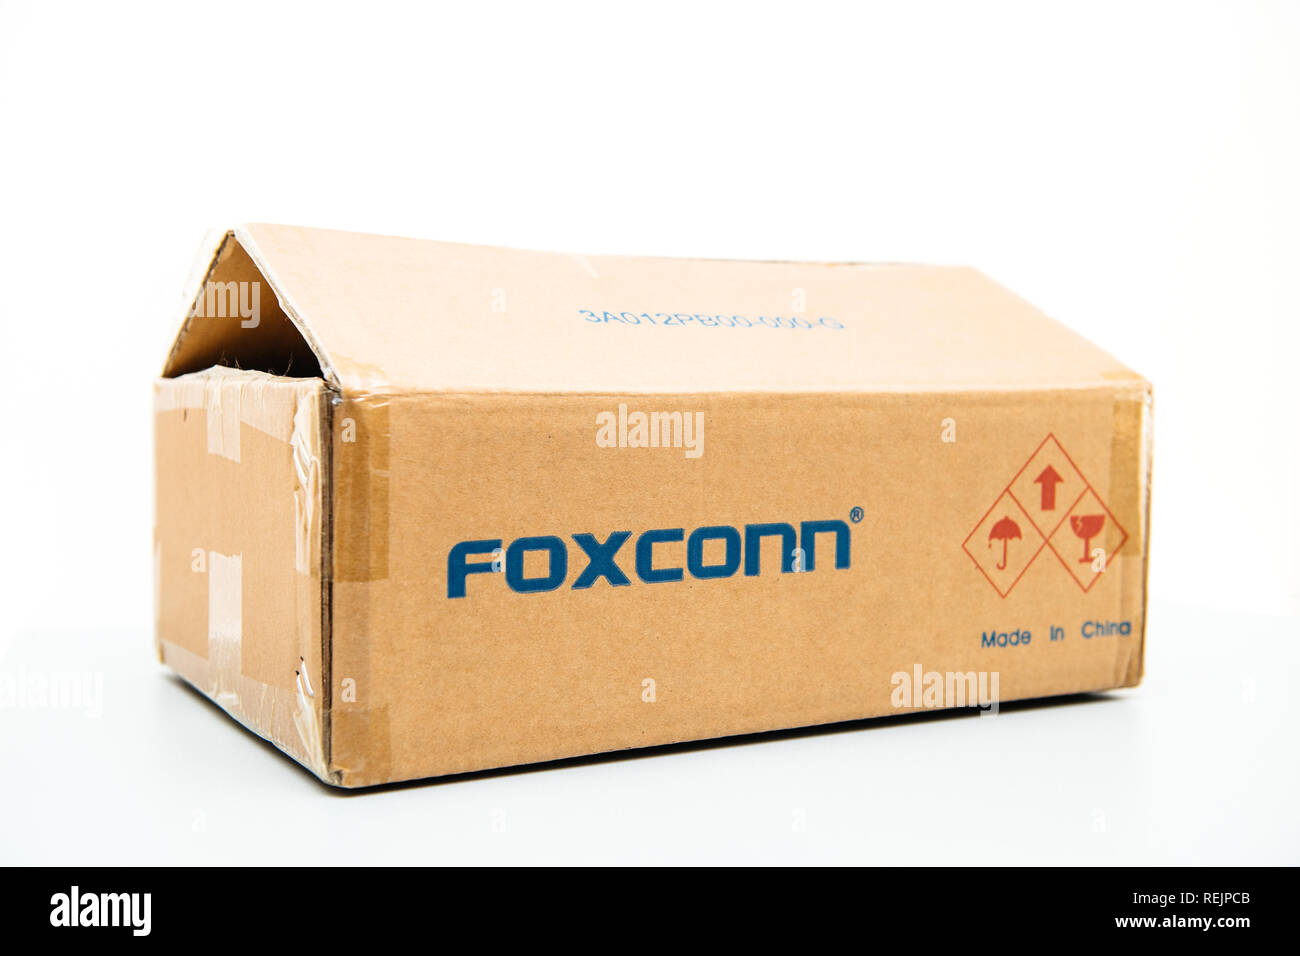 LONDON, UNITED KINGDOM - AUG 23, 2018: Side view of Foxconn cardboard delivery box with logotype on against white background containing spare parts for computers laptop and technology parts Stock Photo